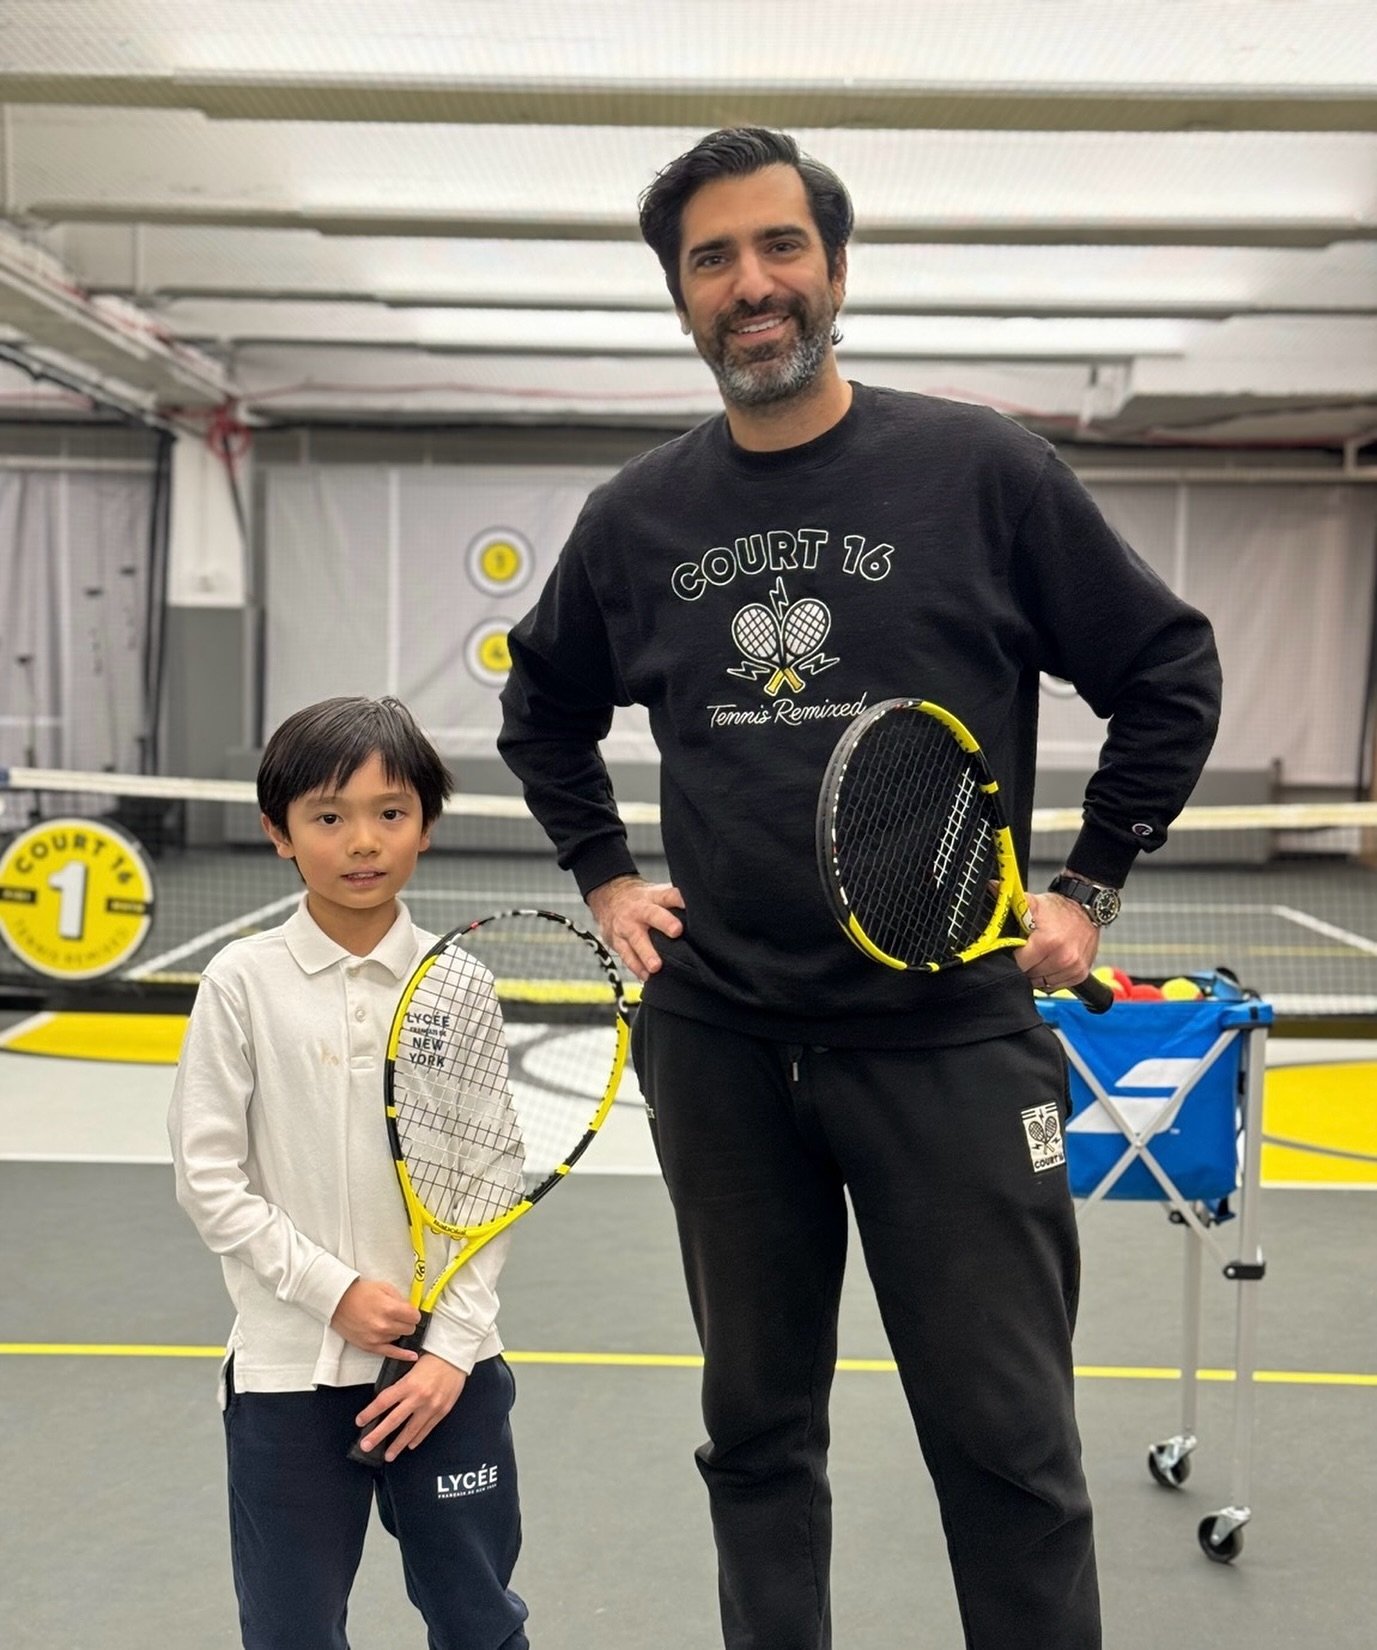 🎾 For nearly a decade, Court 16 has been a pivotal part of NYC families&rsquo; lives, creating balance and joy in the afternoons. Each day, our courts light up with energy as young players like Adam refine their skills under the guidance of Anthony,